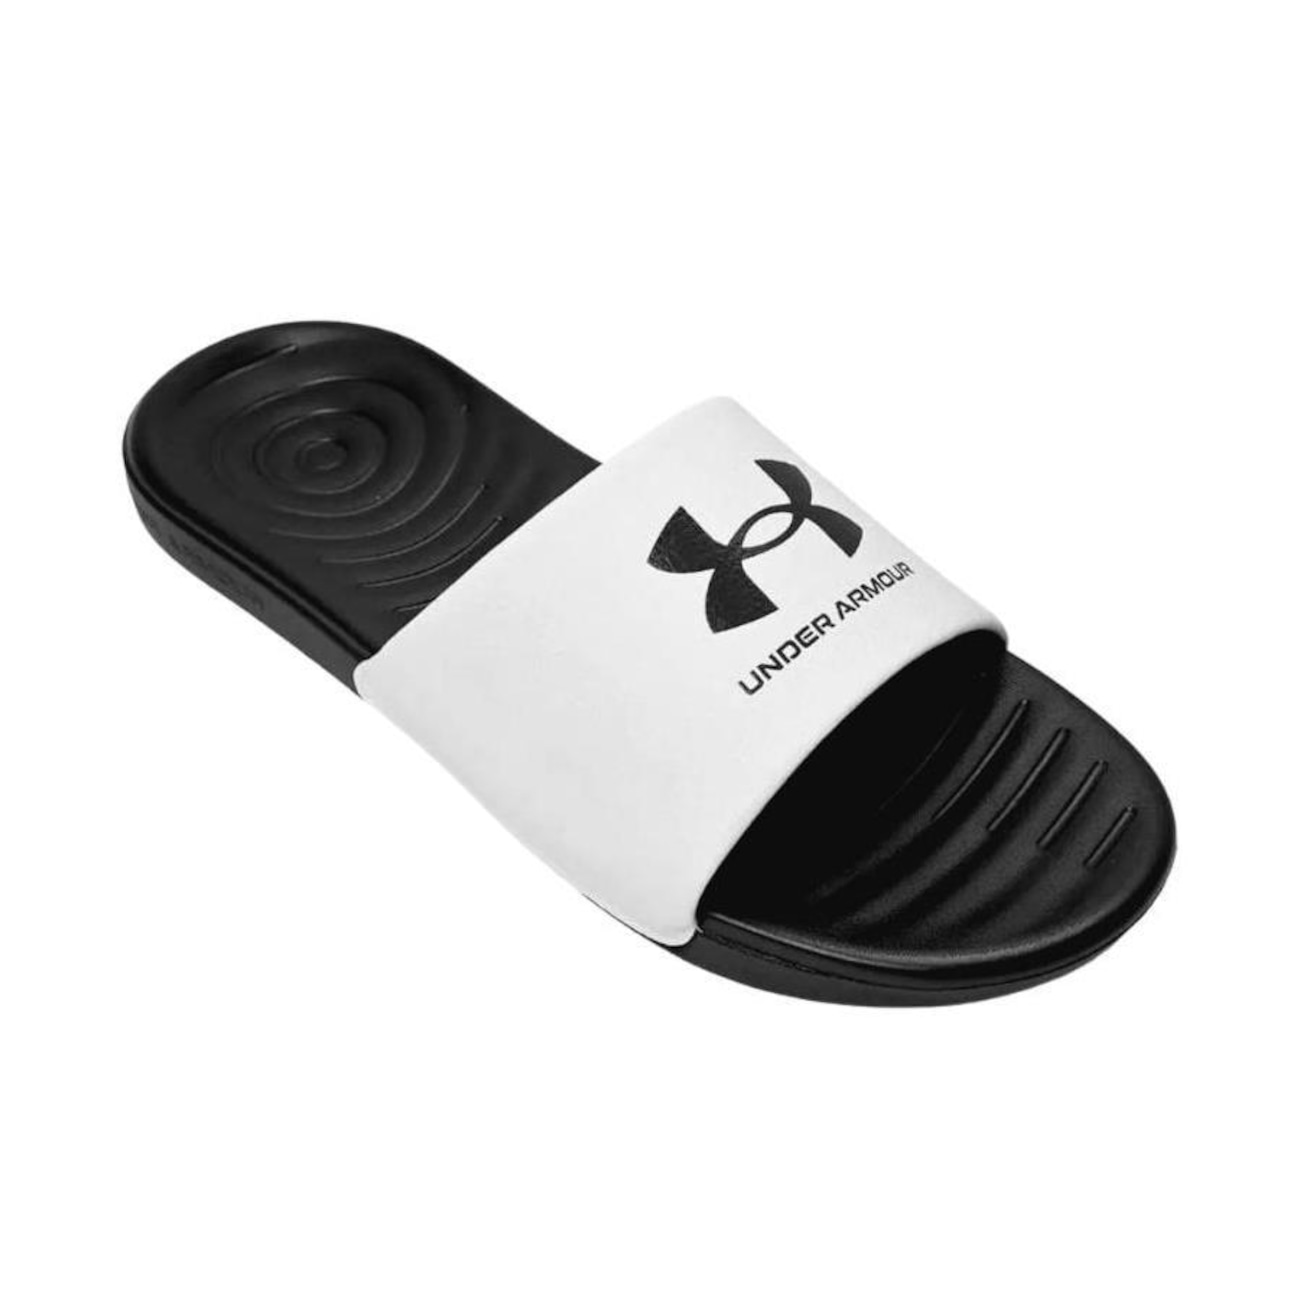 CHINELO UNDER ARMOUR 3023495 CORE